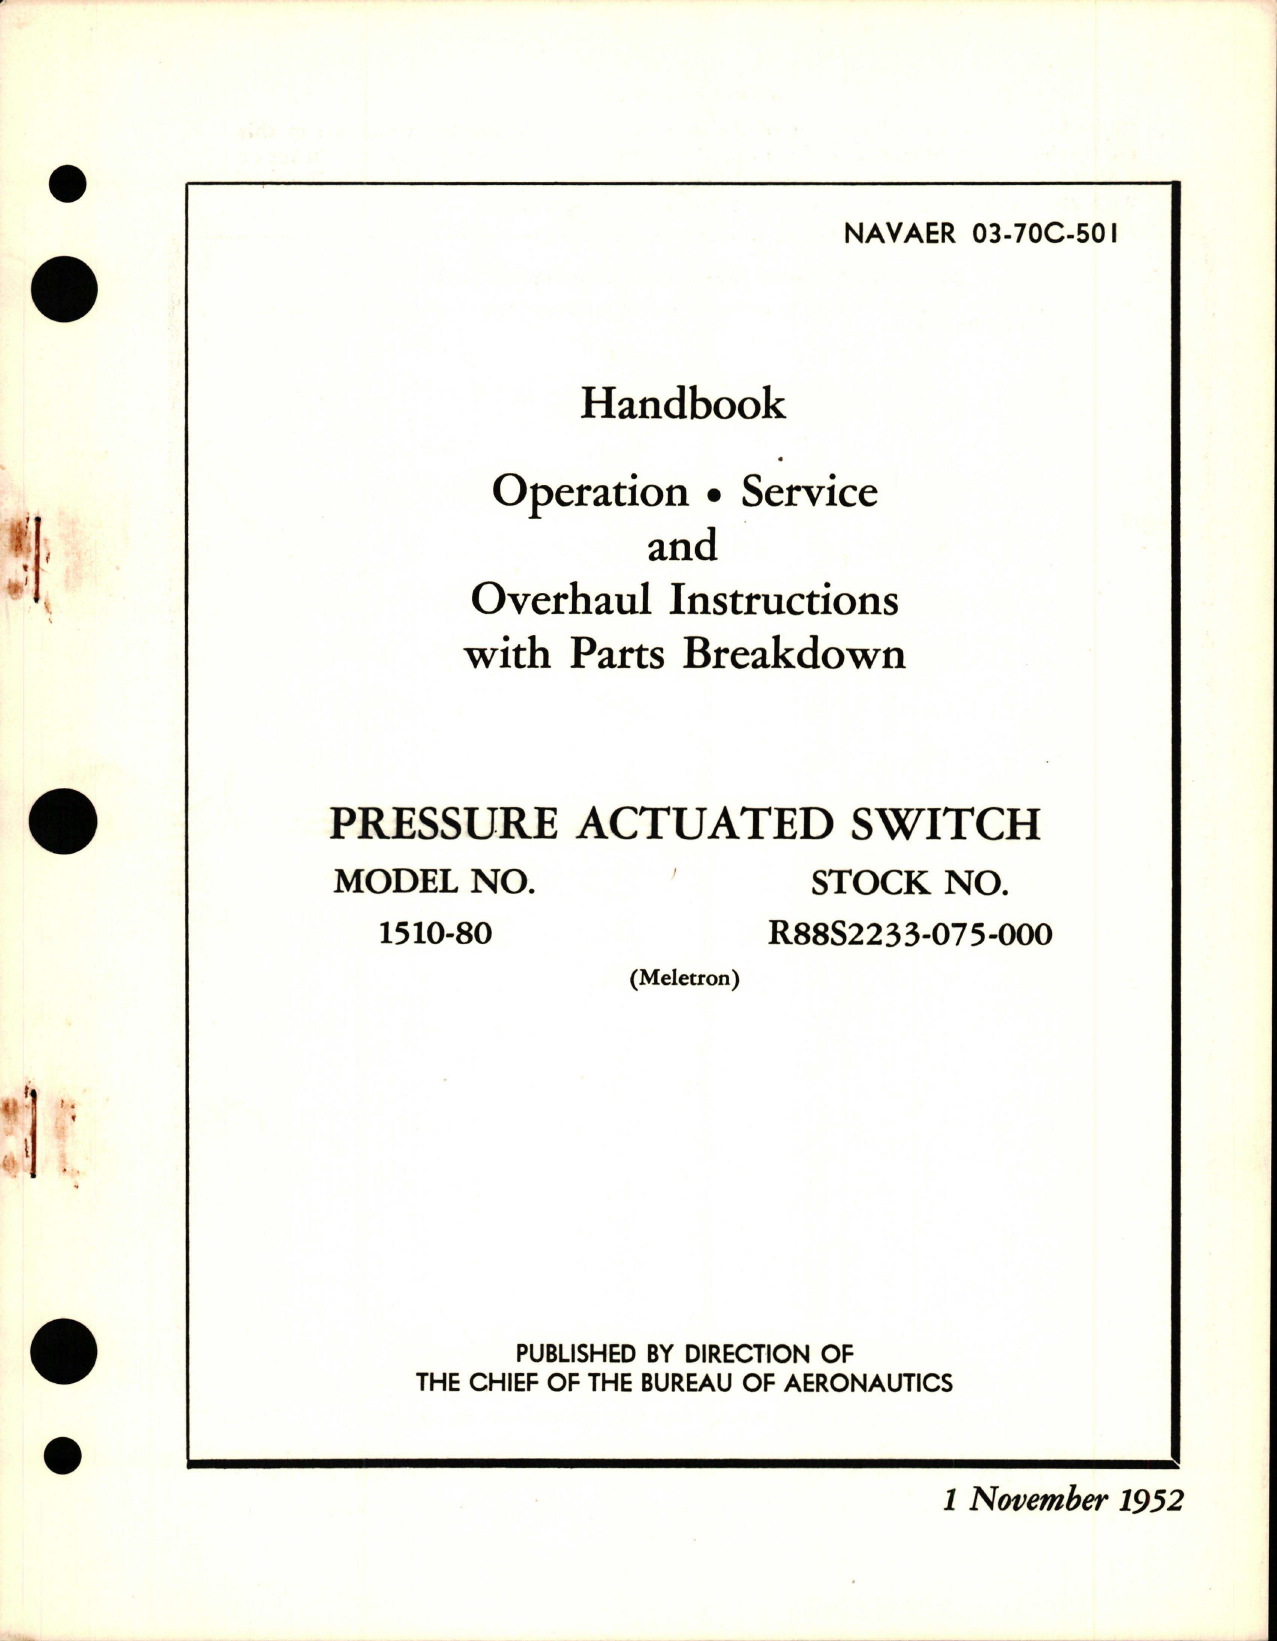 Sample page 1 from AirCorps Library document: Operation, Service and Overhaul Instructions with Parts Breakdown for Pressure Actuated Switch - Model 1510-80